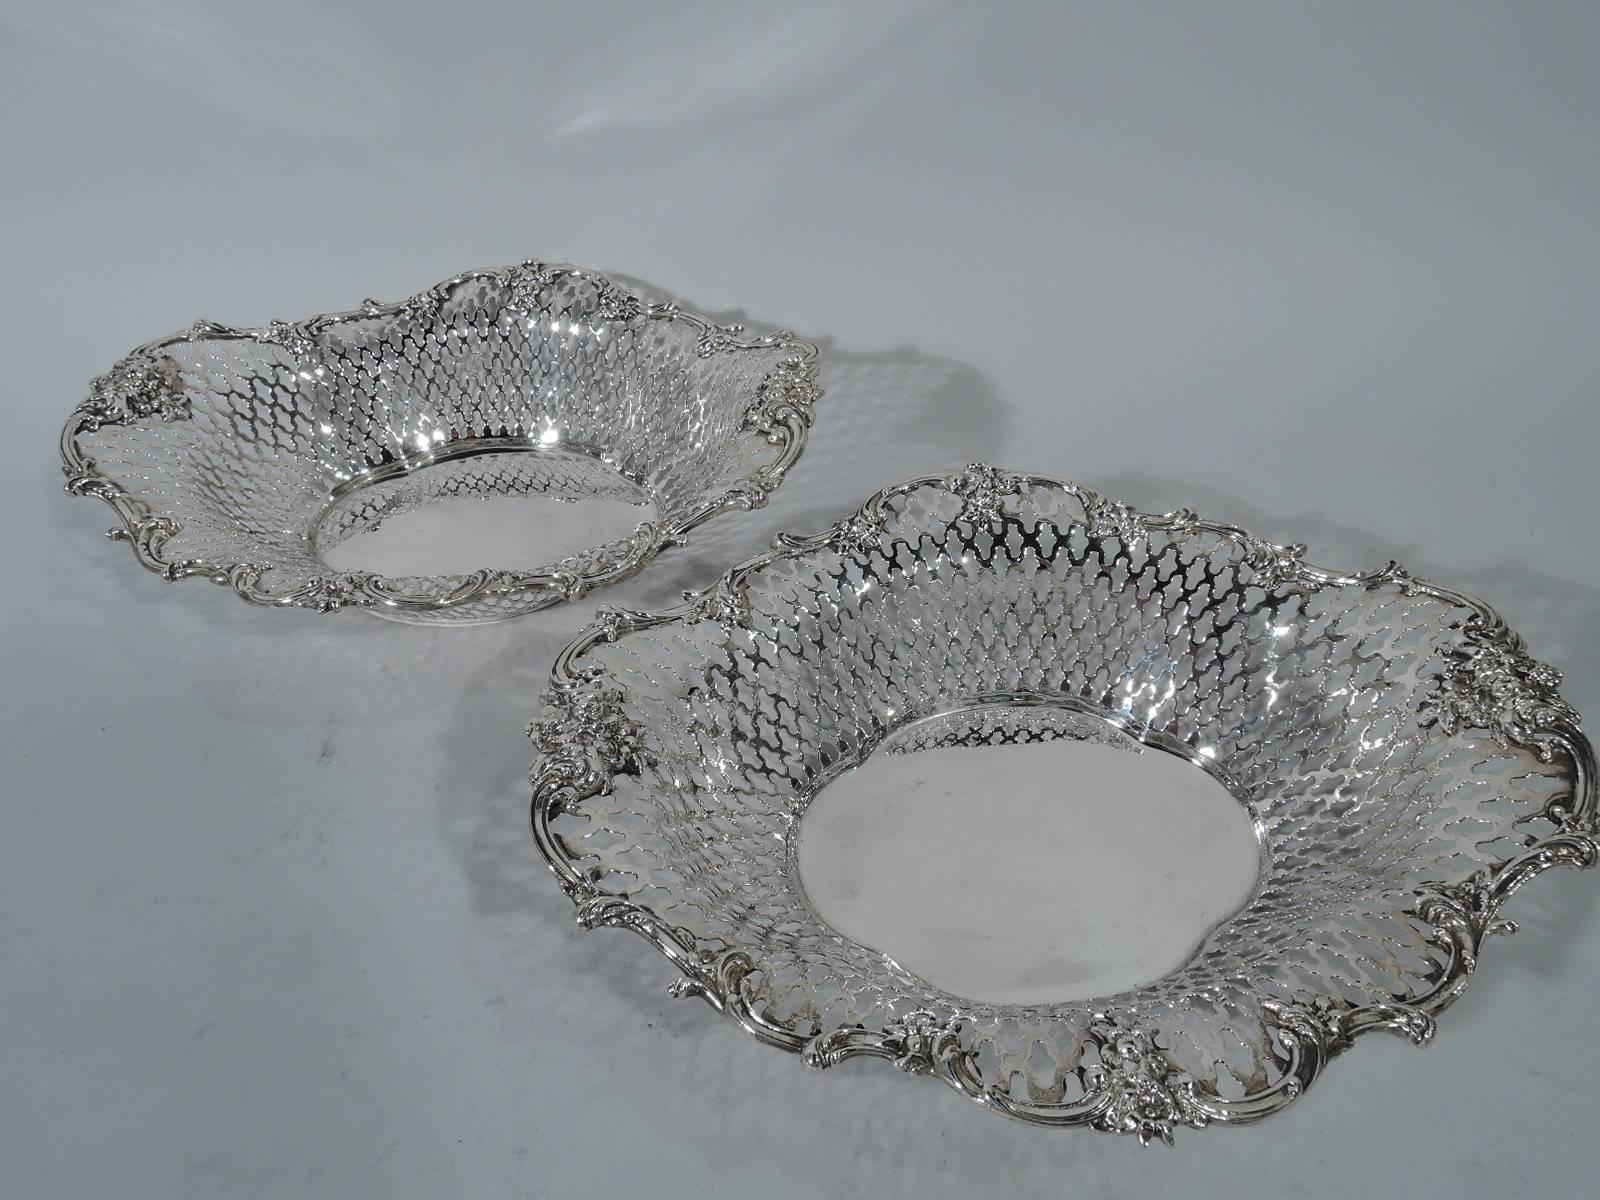 Pair of Edwardian sterling silver baskets. Made by Roger Williams (later part of Gorham) in Providence. Each: Solid quatrefoil well with tapering sides and wavy rim. Sides have pierced quatrefoil pattern. Rim has applied scrolls and flowers.